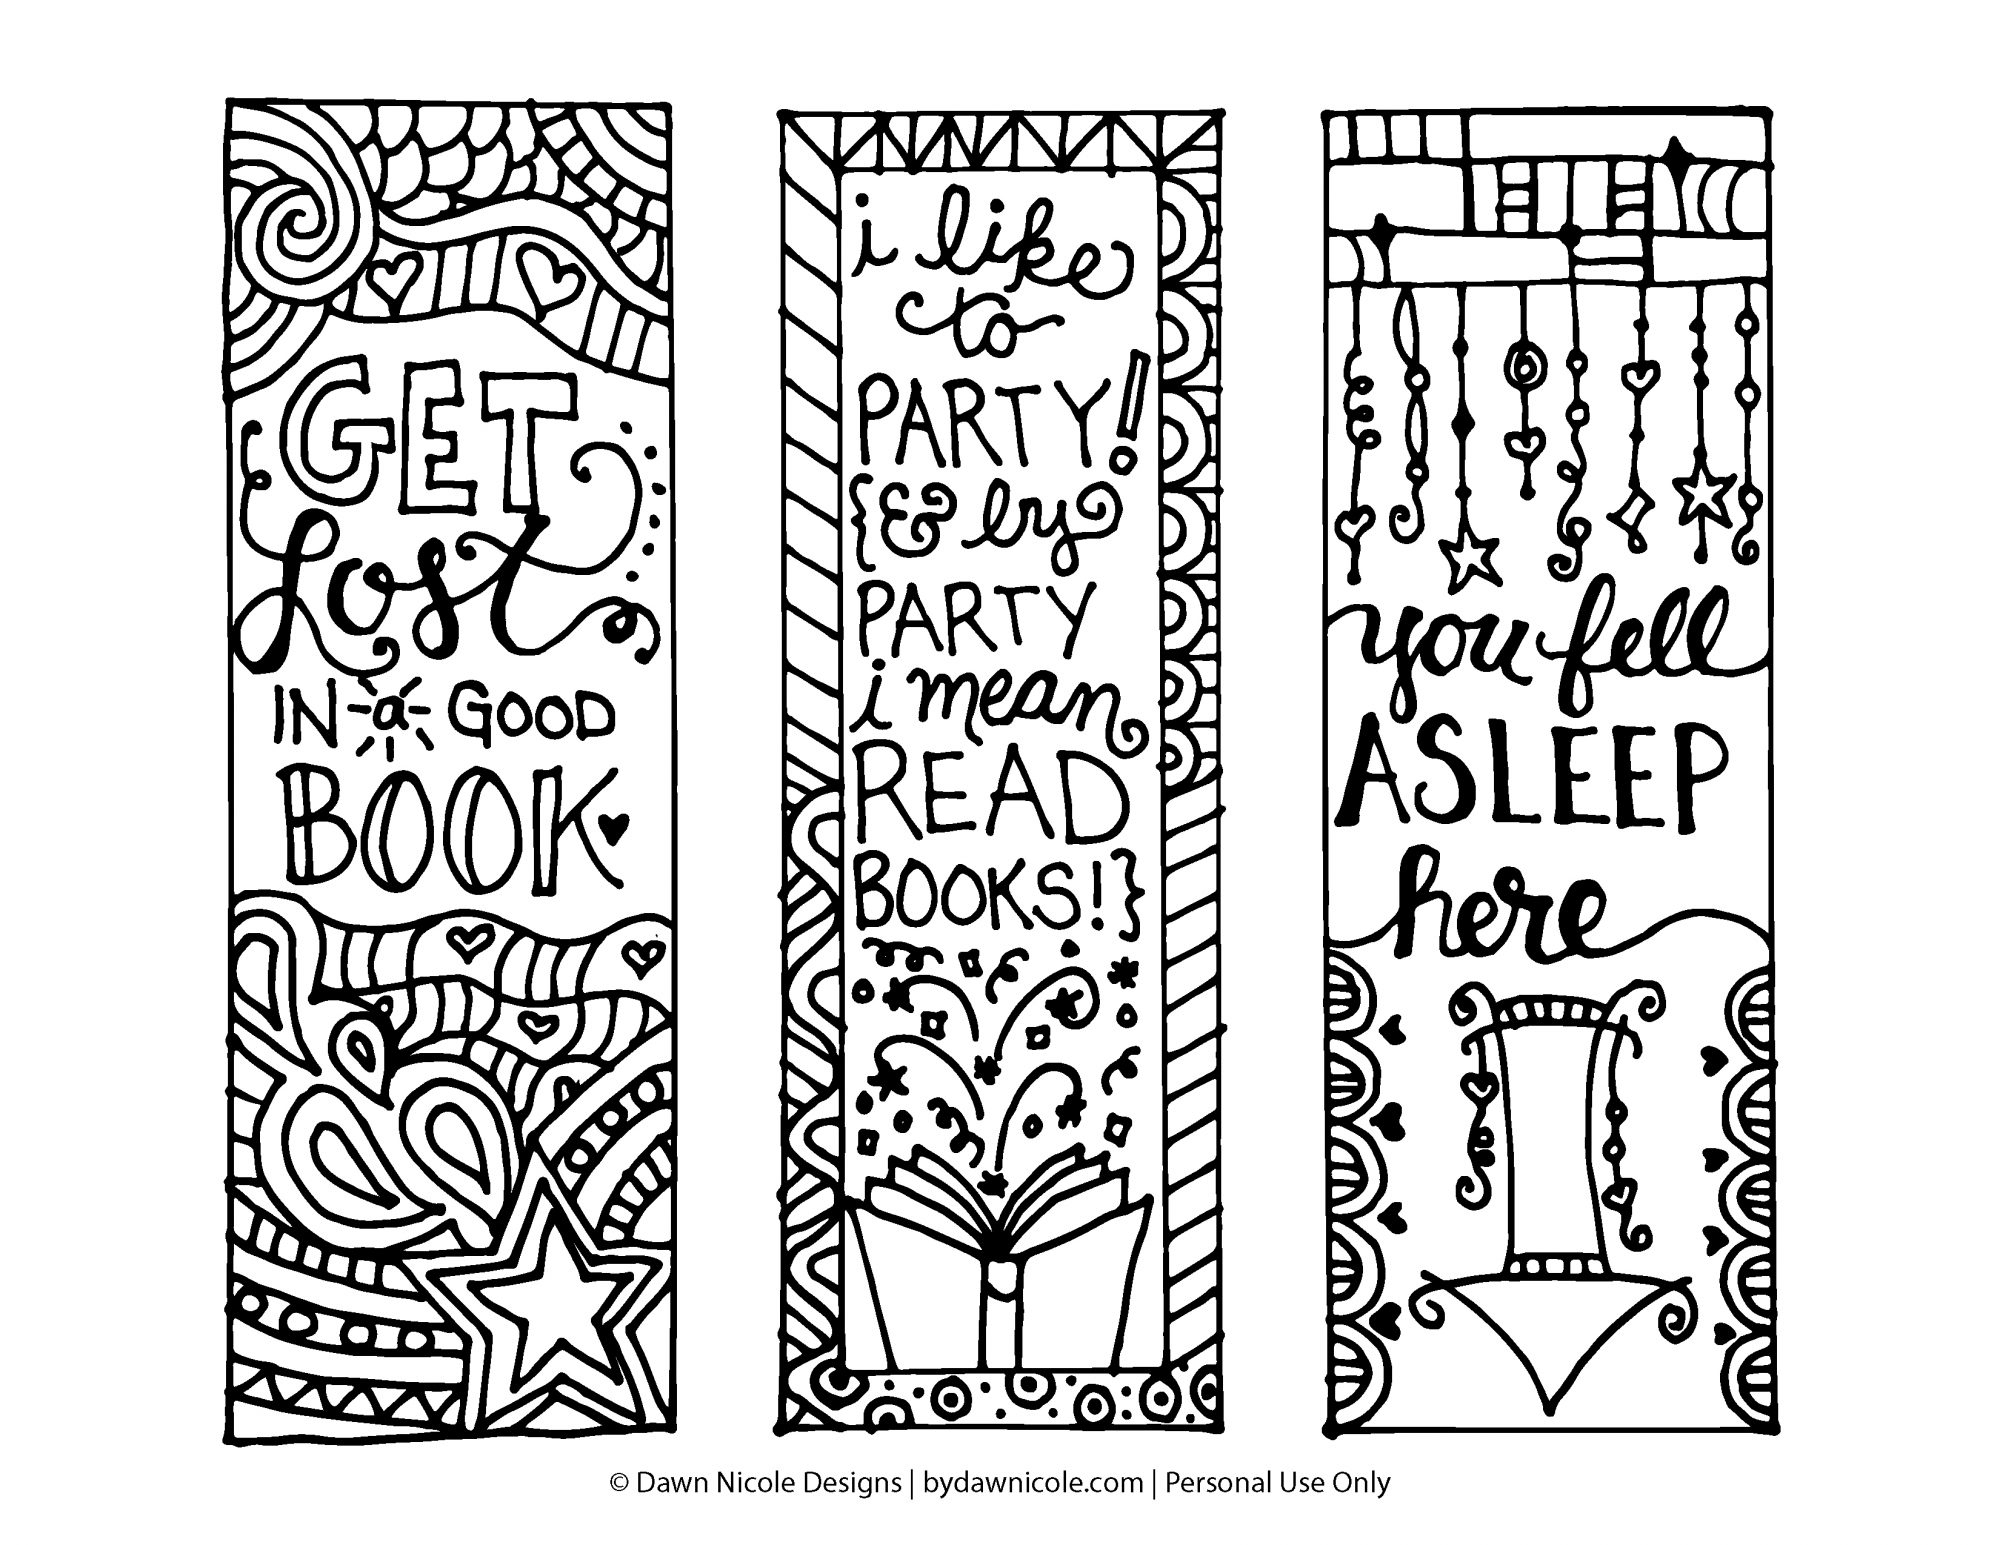 Free Printable Coloring Page Bookmarks | Dawn Nicole Designs® - Free Printable Bookmarks To Color